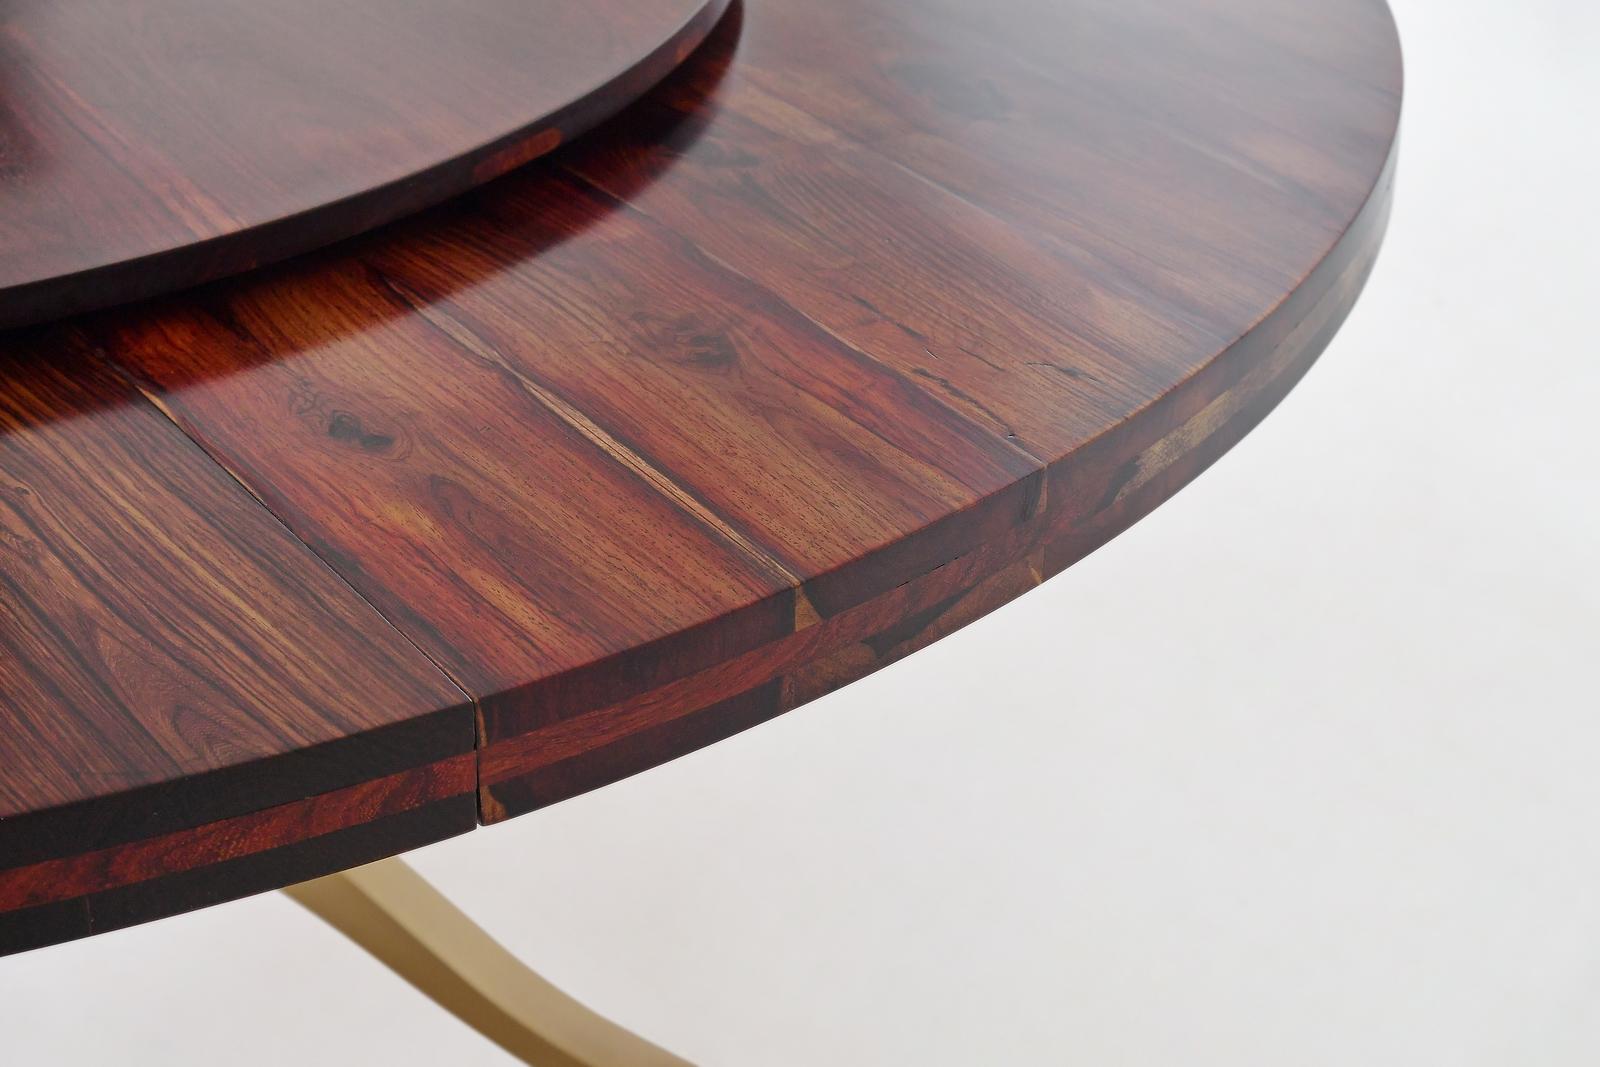 Bespoke Round Table, Reclaimed Hardwood, Brass Base by P. Tendercool For Sale 4